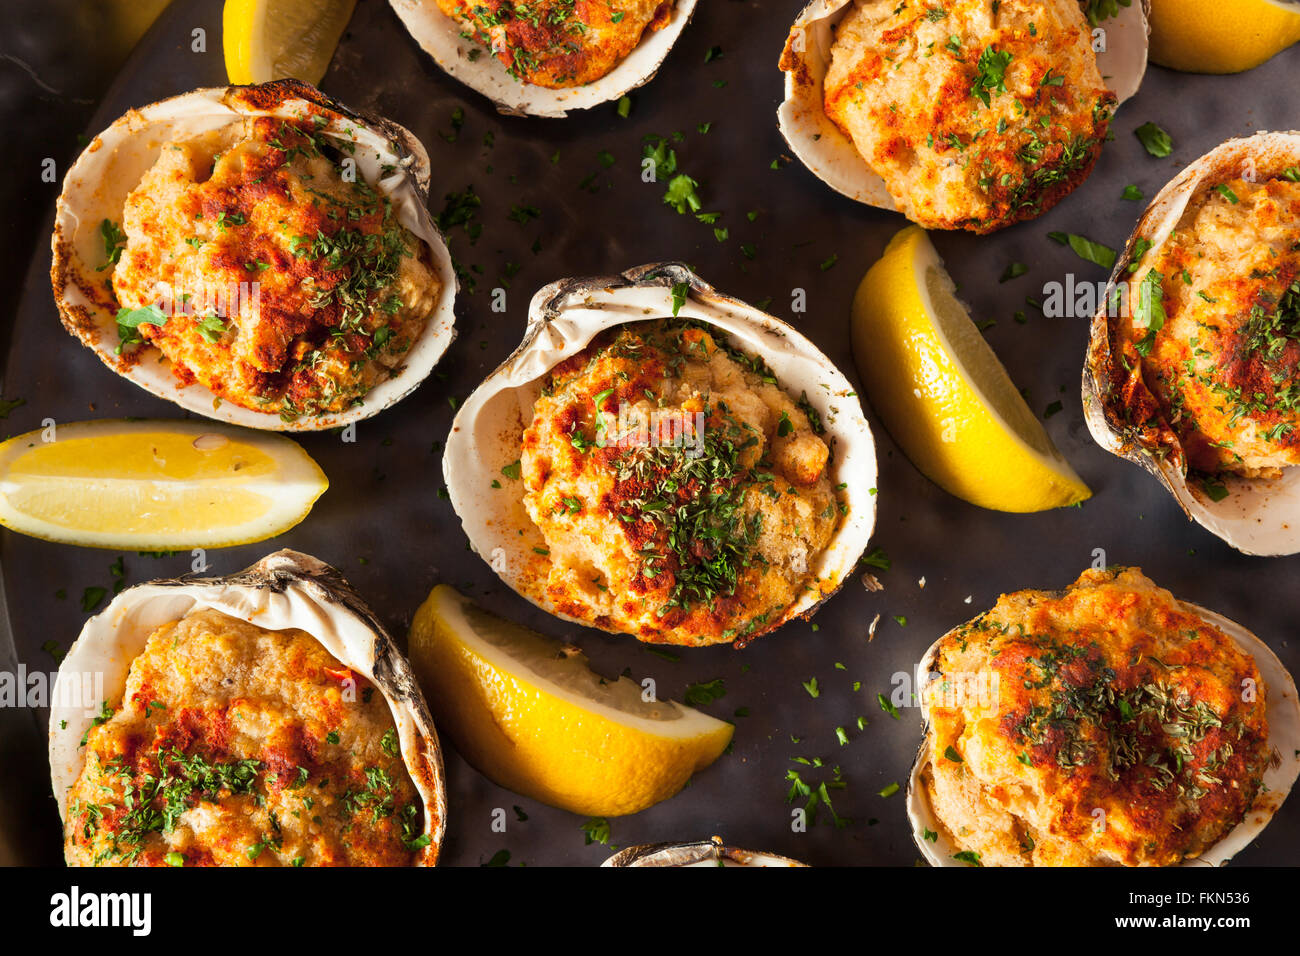 Homemade Baked Clams with Lemon and Parsley Stock Photo